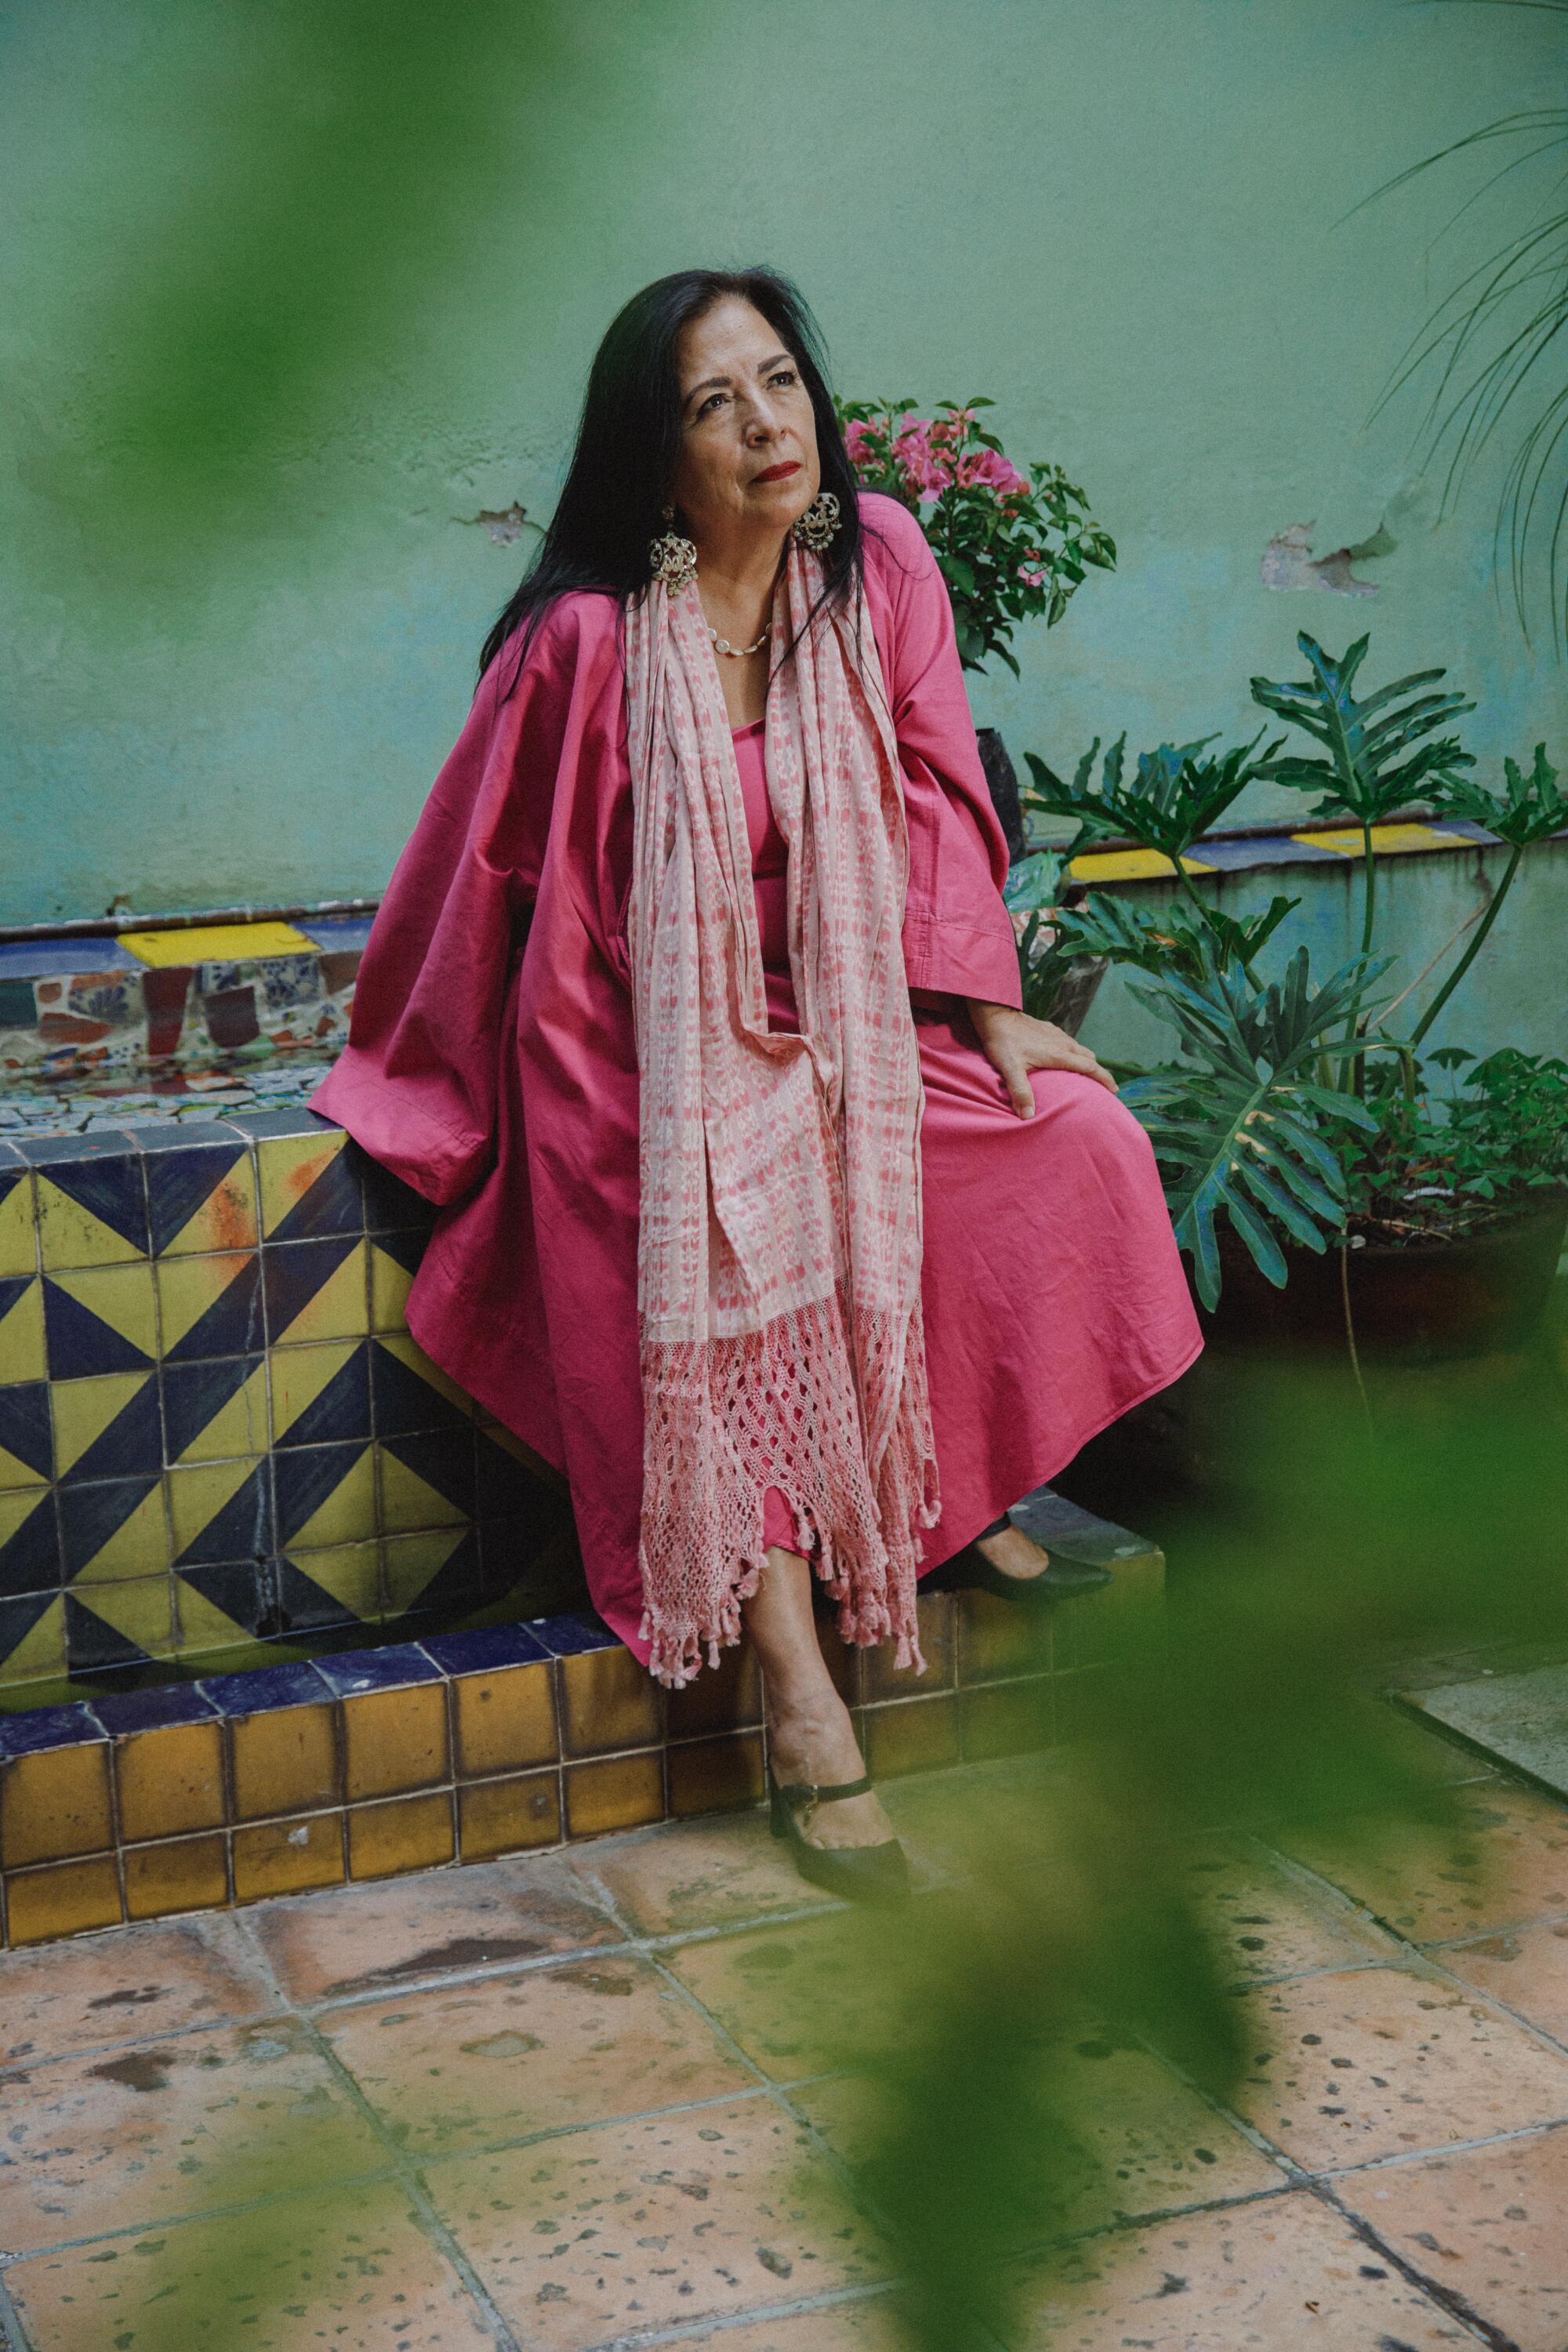 A woman in a long, flowing pink robe sits in a garden.